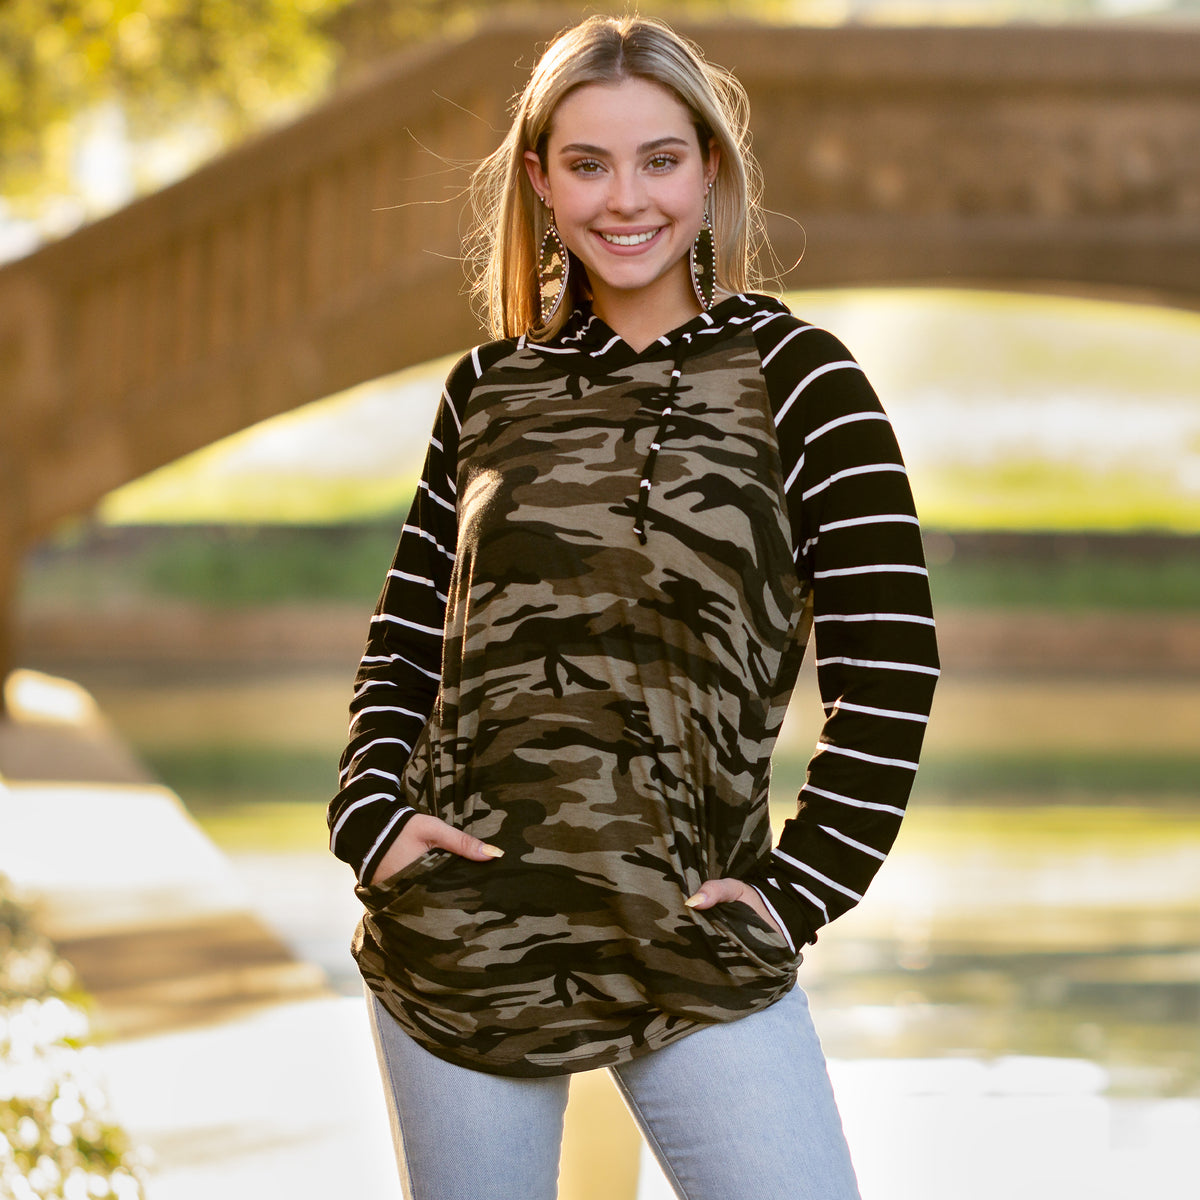 10493 - Camouflage Hoodie Top with Striped Sleeves